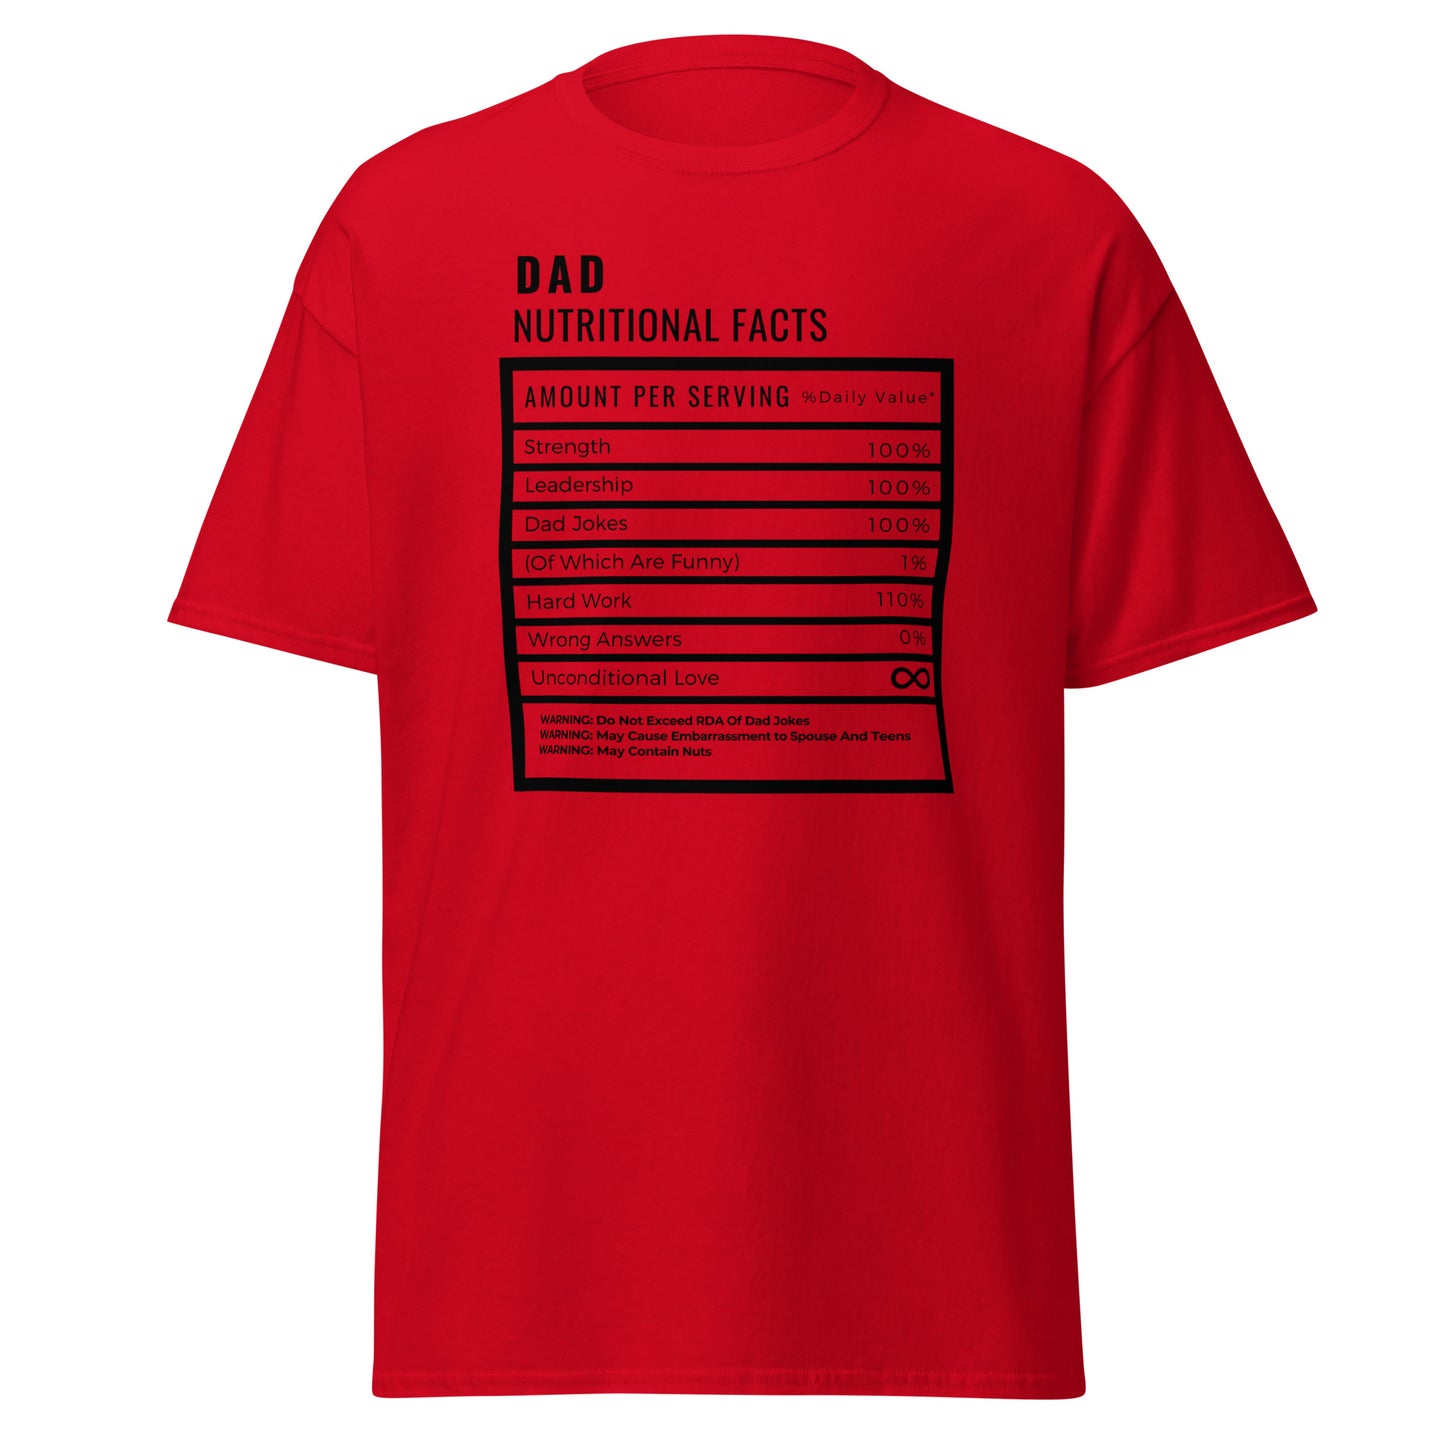 Men's classic tee "Dad Nutritional Facts"